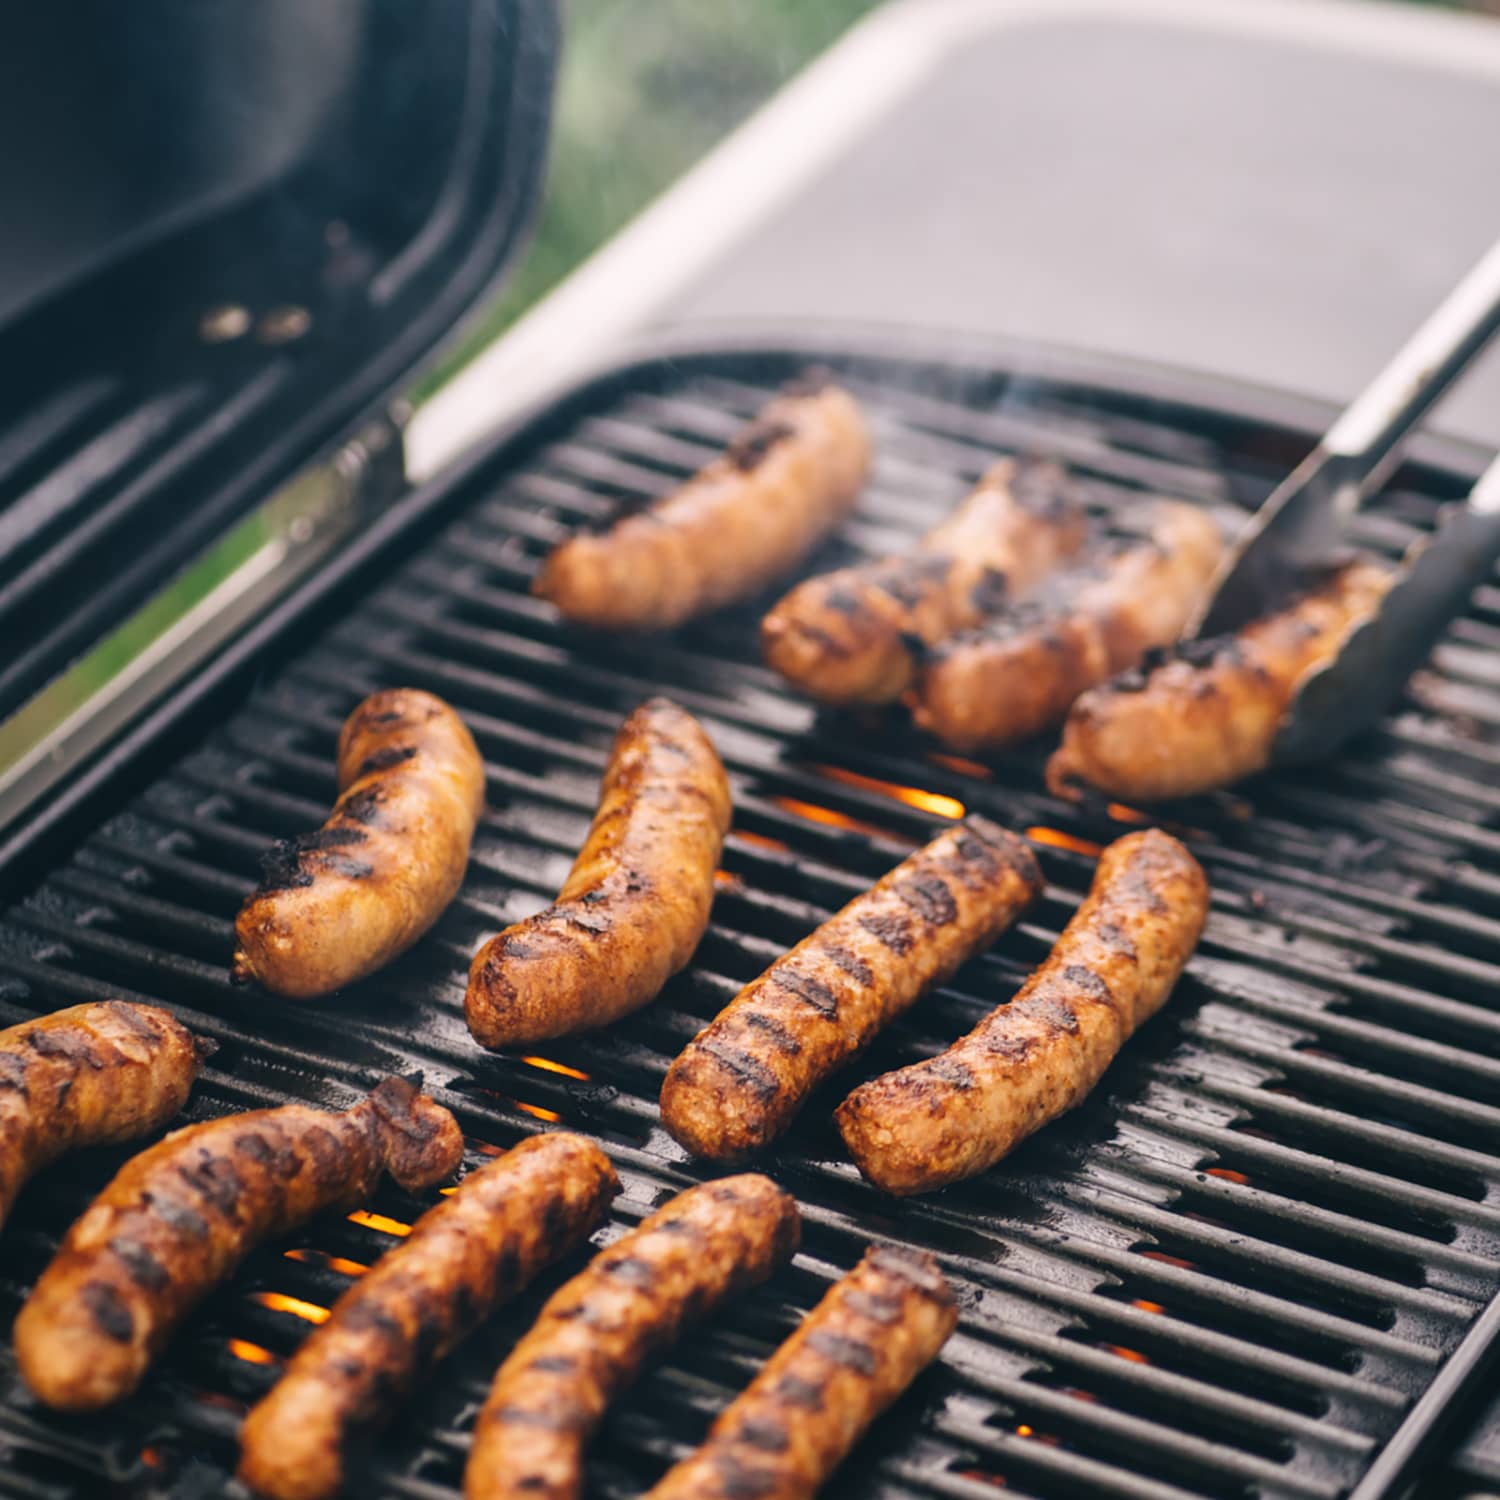 Over 42,000 Pounds of Johnsonville Sausage Recalled Due to